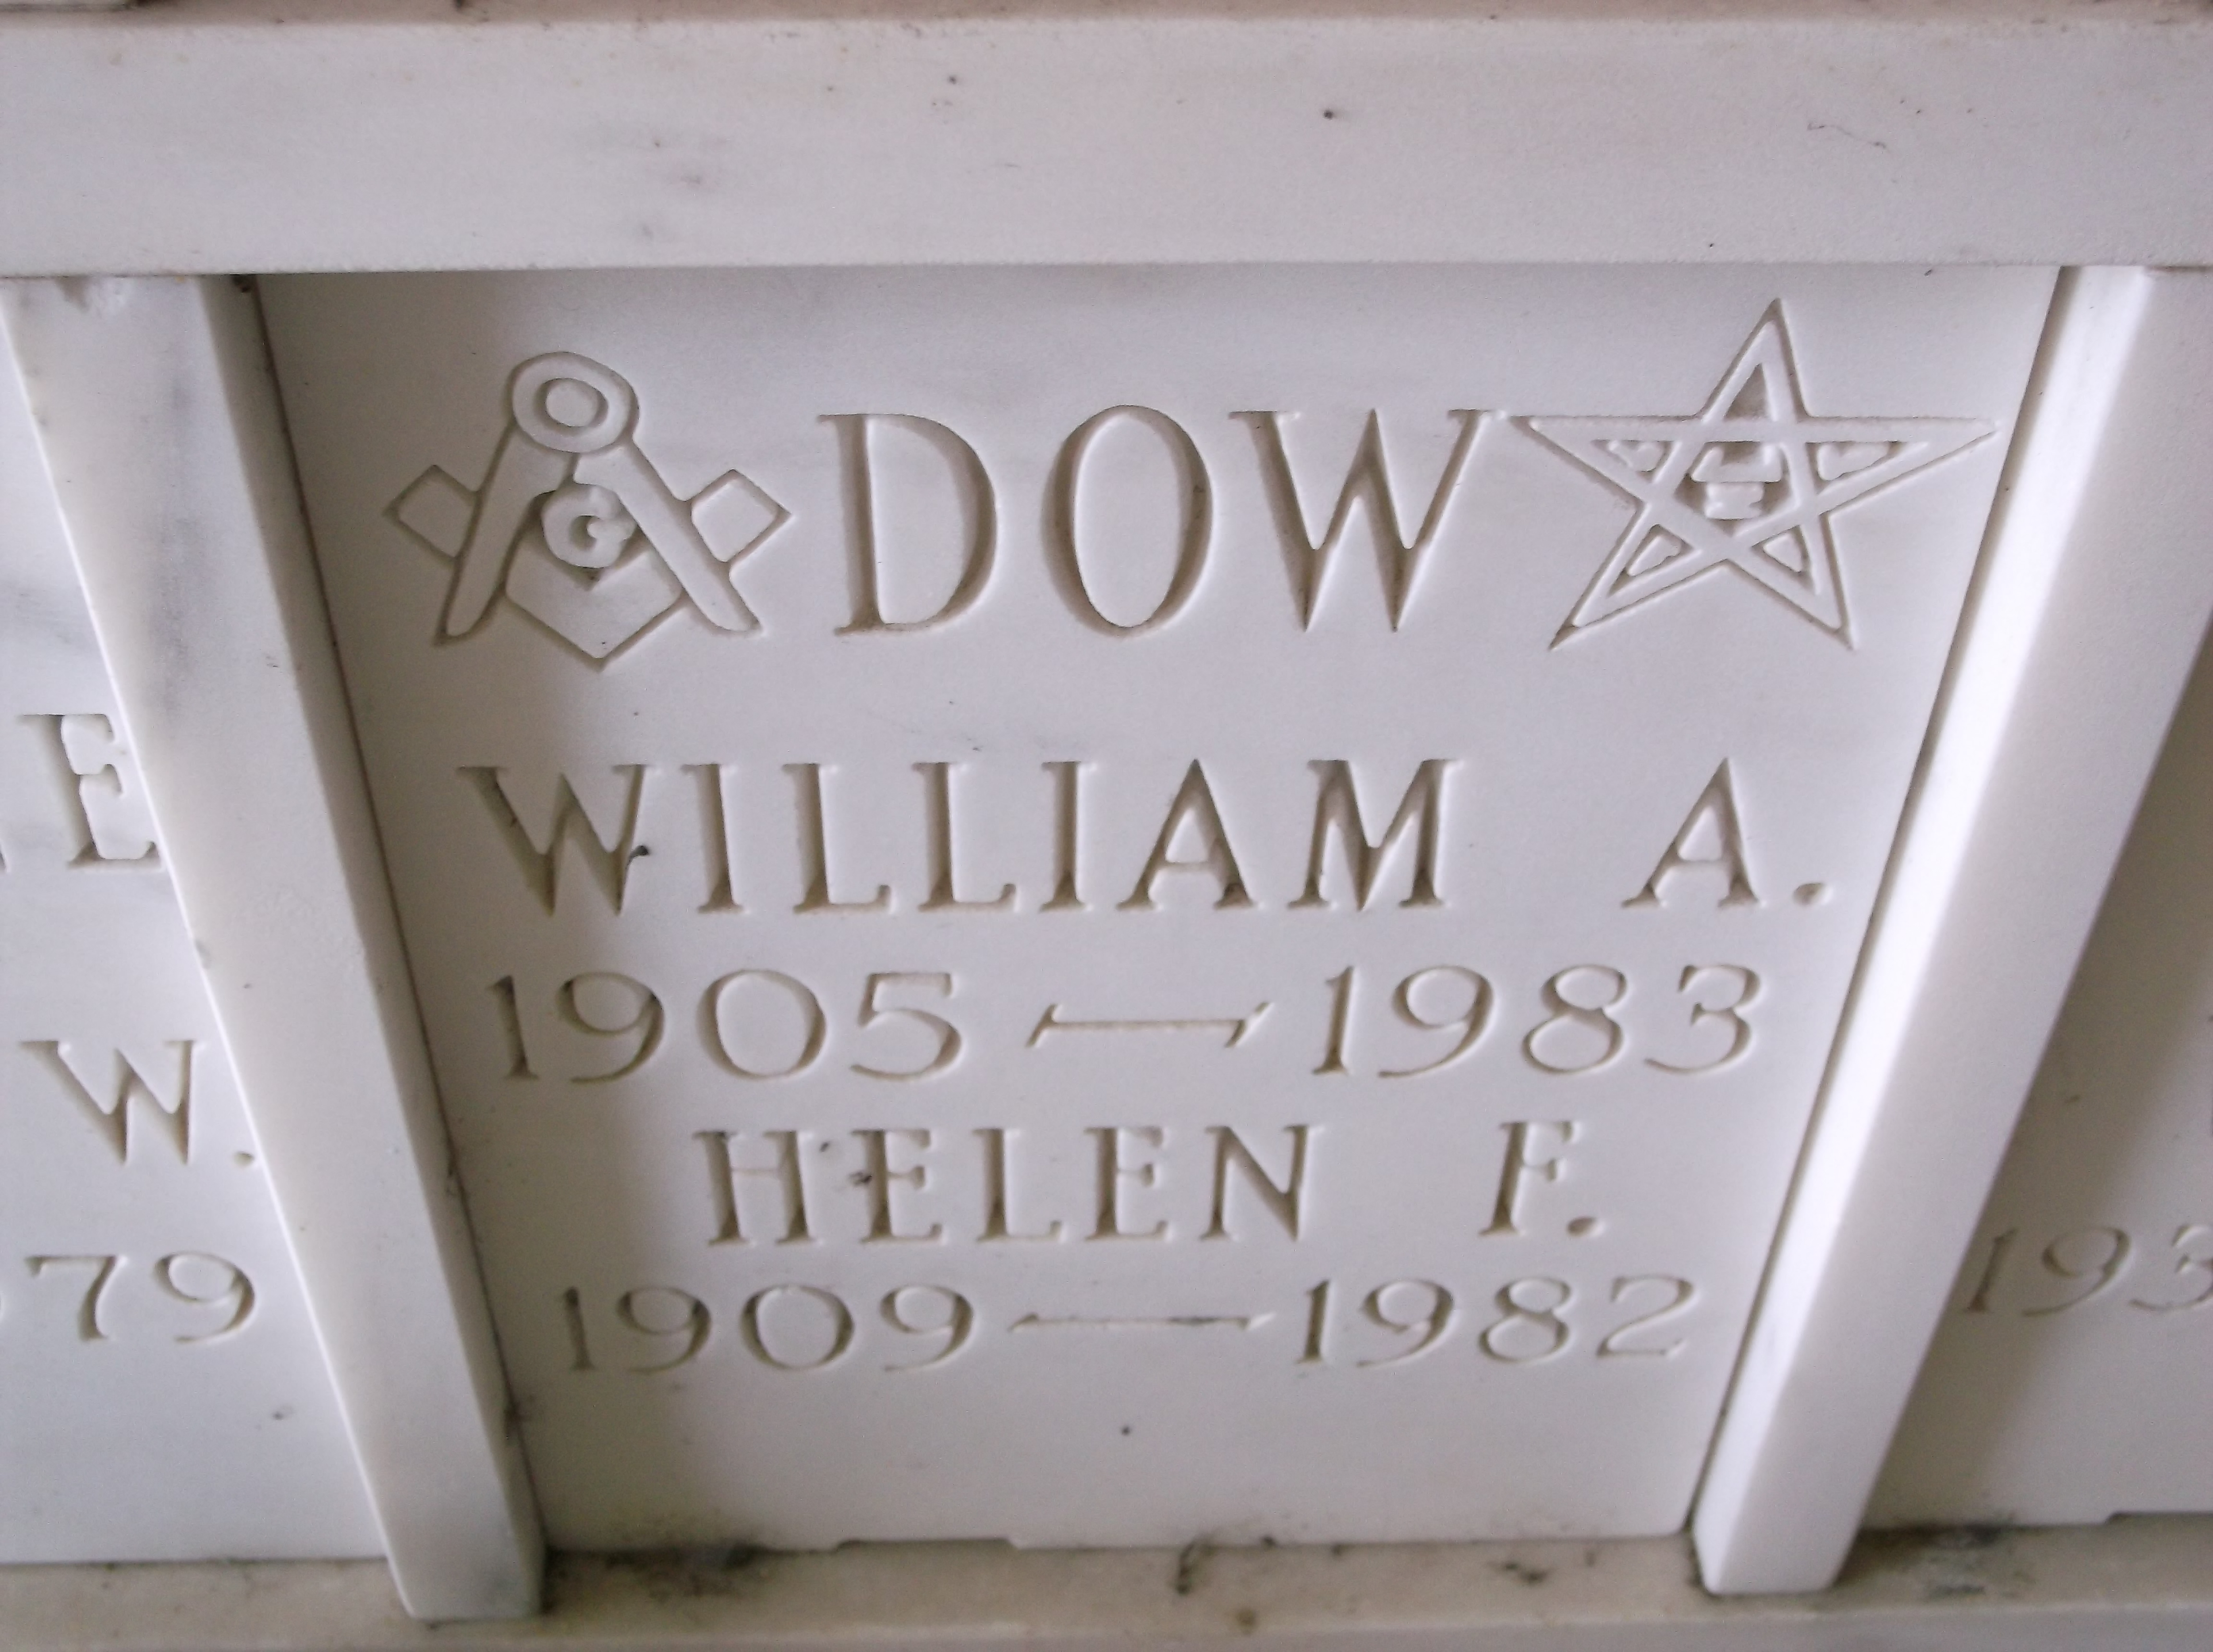 William A Dow